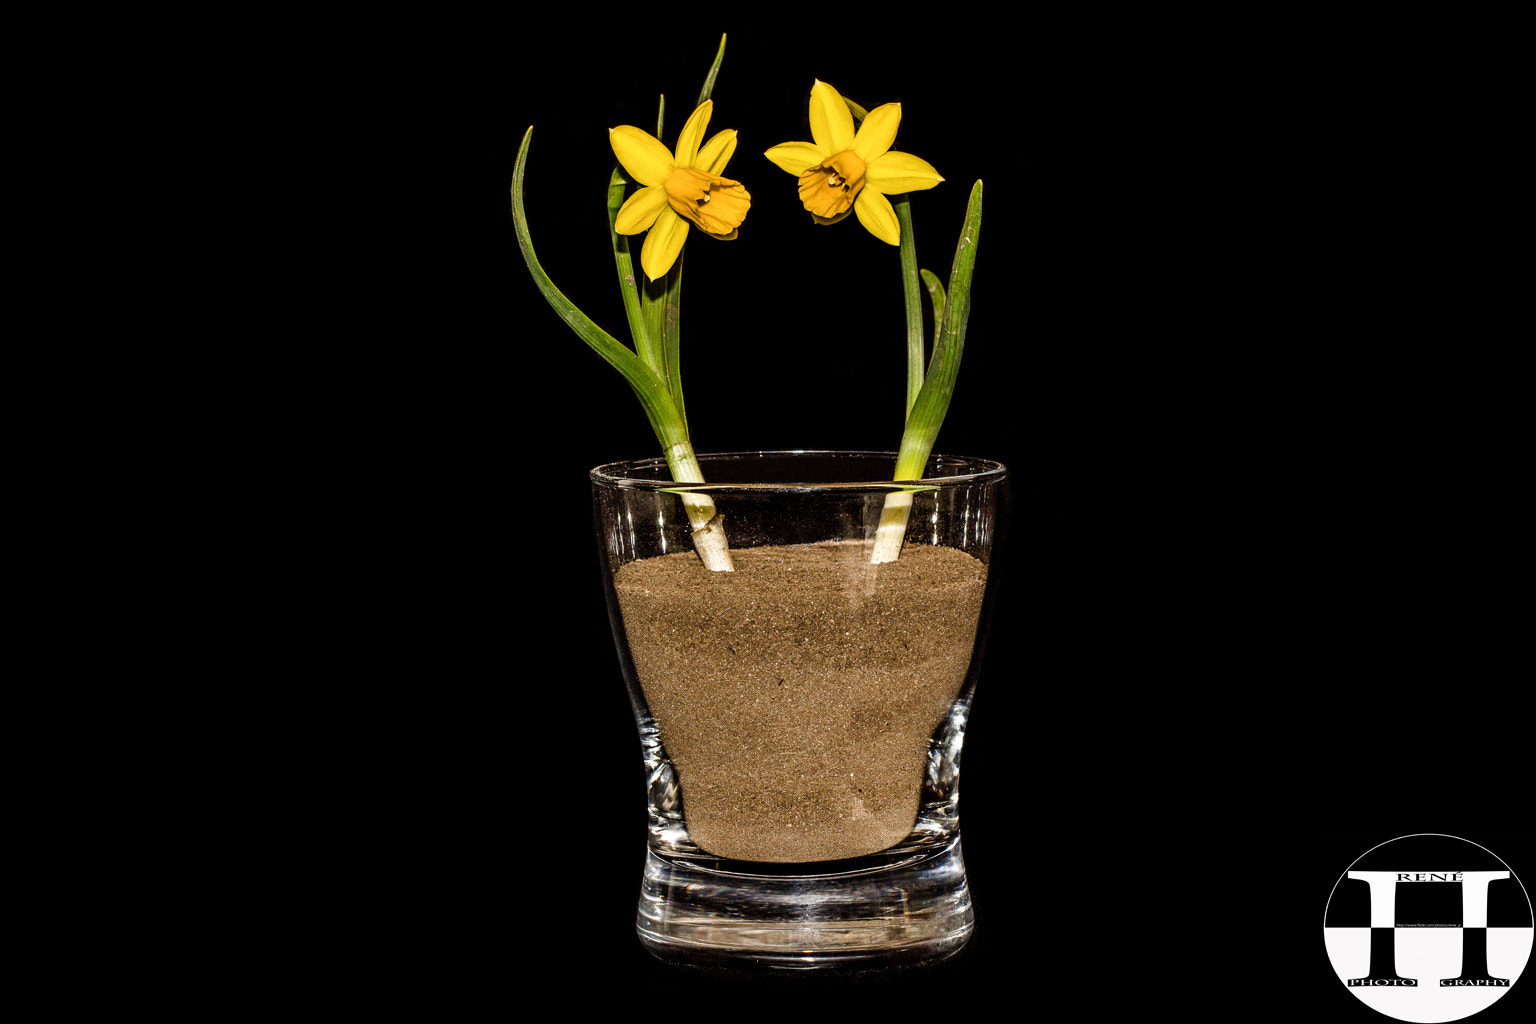 Two Daffodils In A Glass